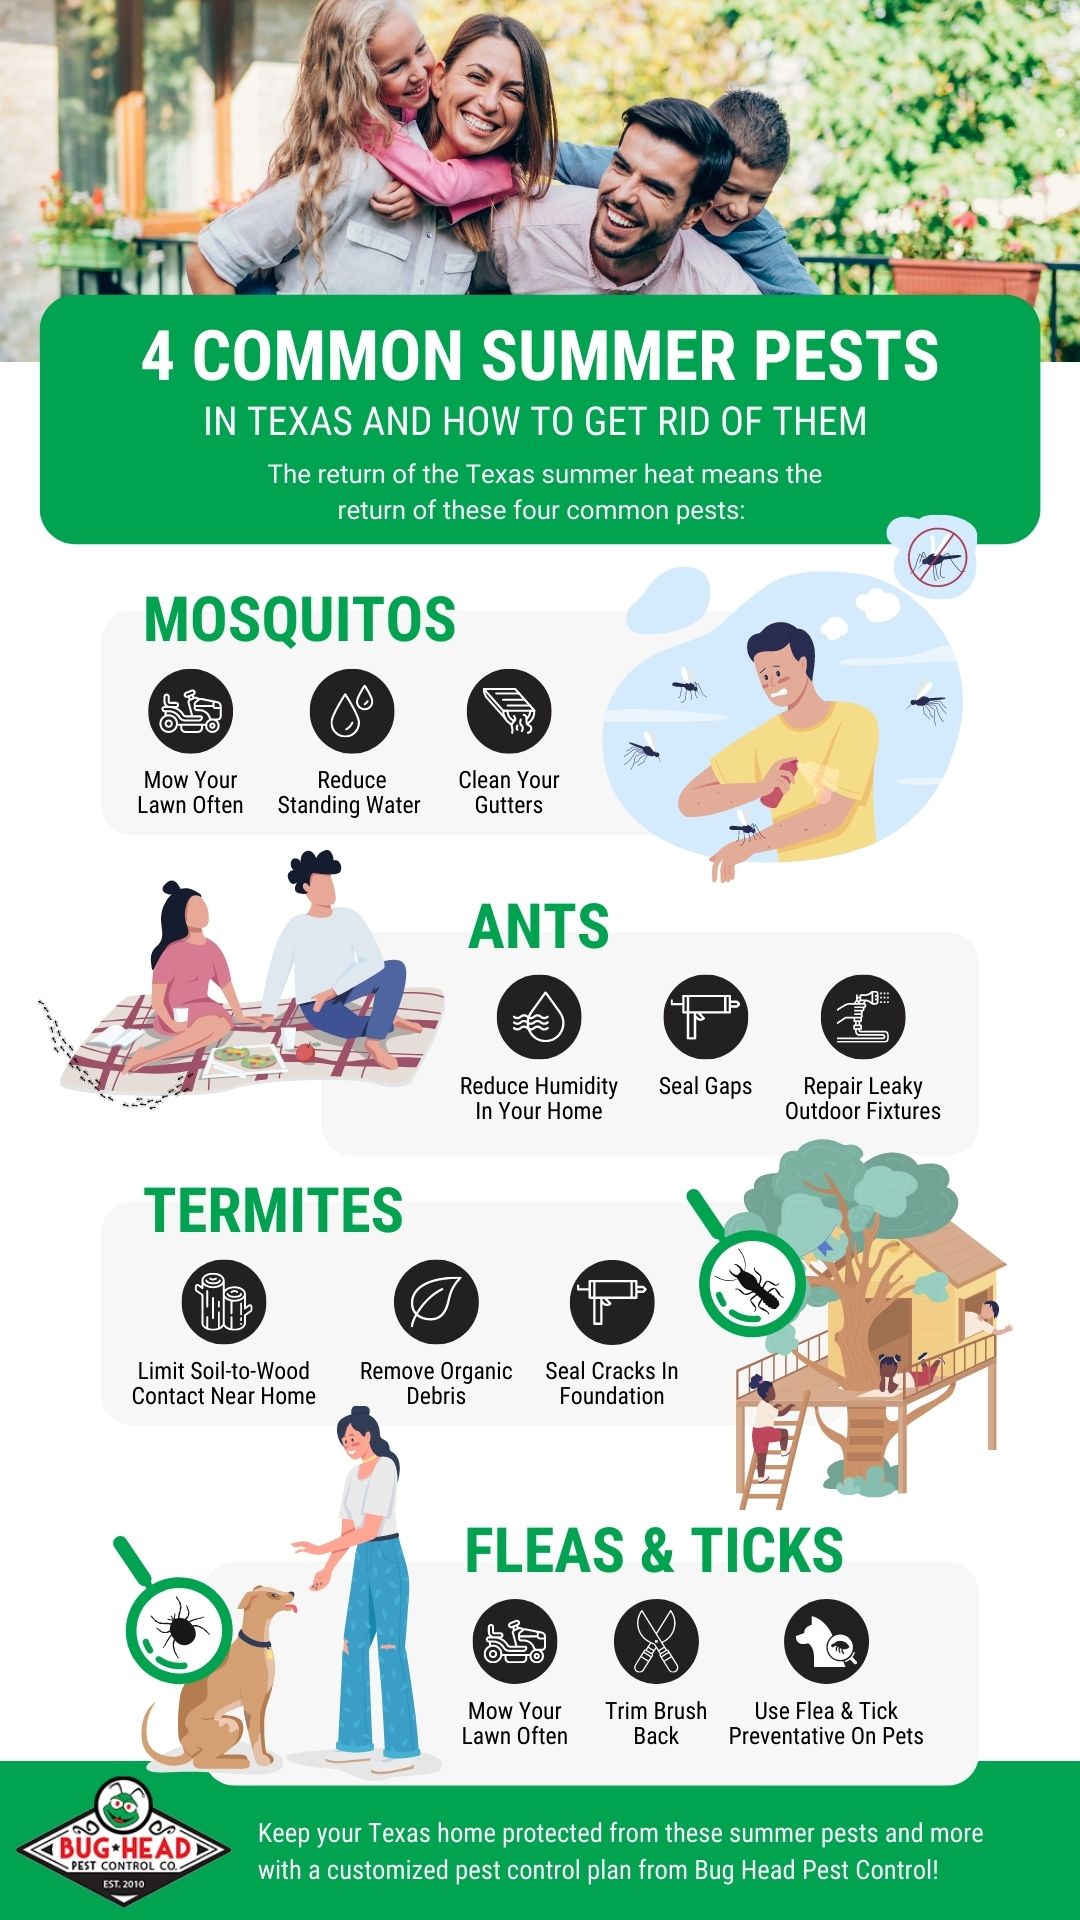 M35984-Bug-Head-Pest-Control-infographic-4-Common-Summer-Pests-In-Texas-2.jpg